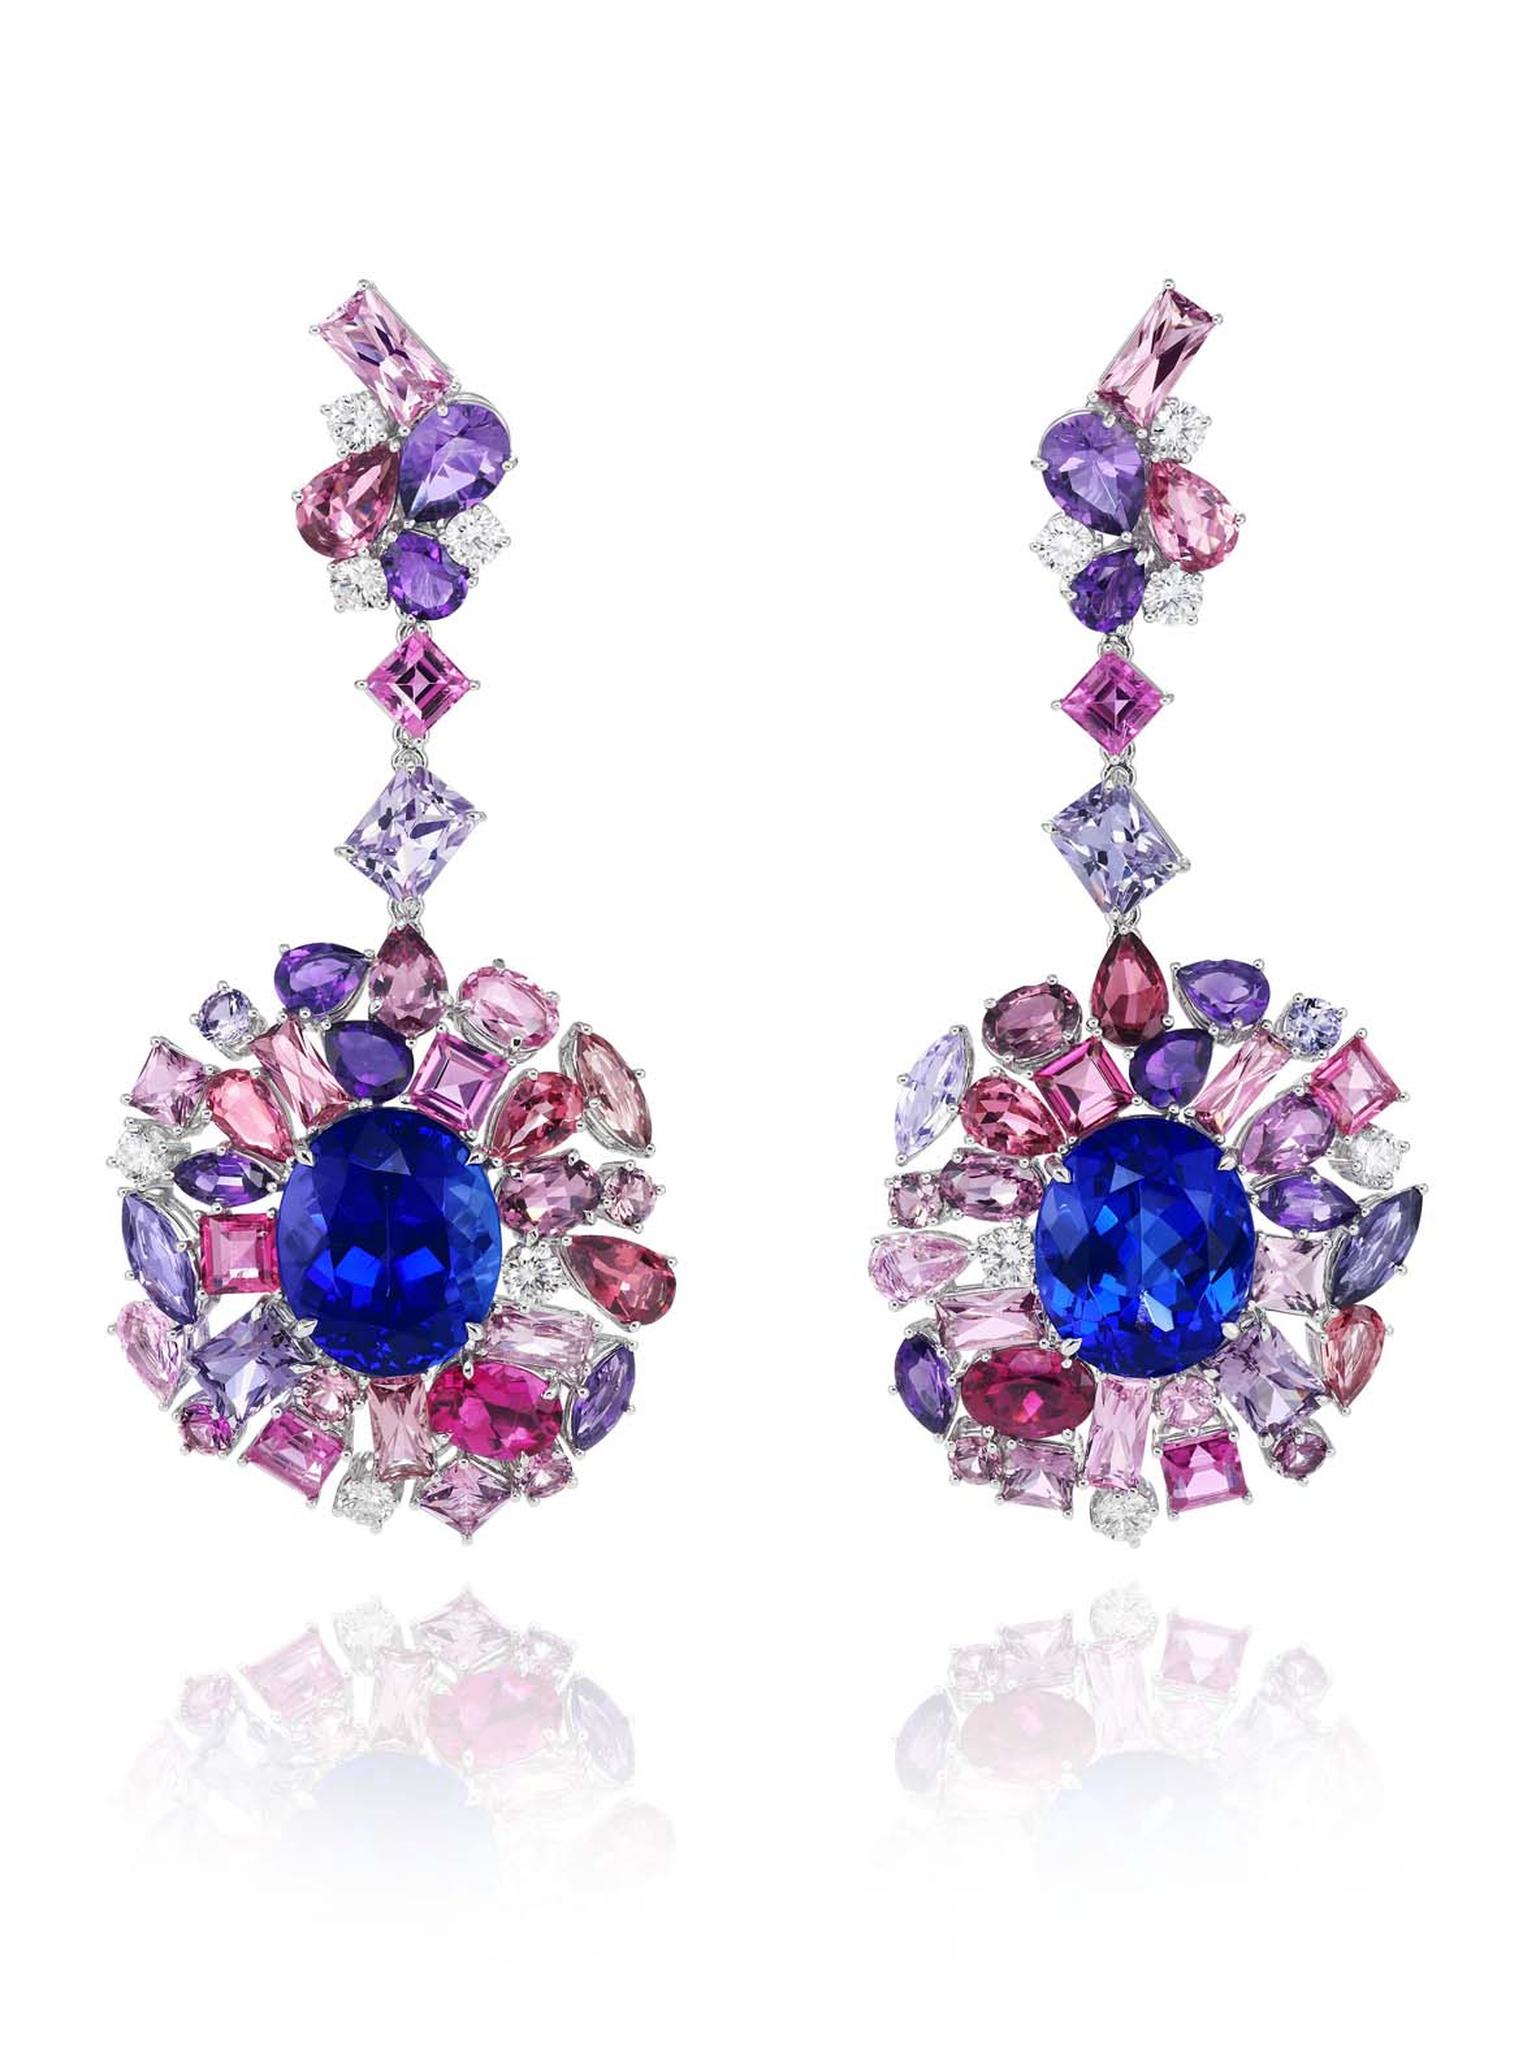 849374-1001 Tanzanite Earrings  from the Red Carpet Collection 2013ChopardChopard.jpg